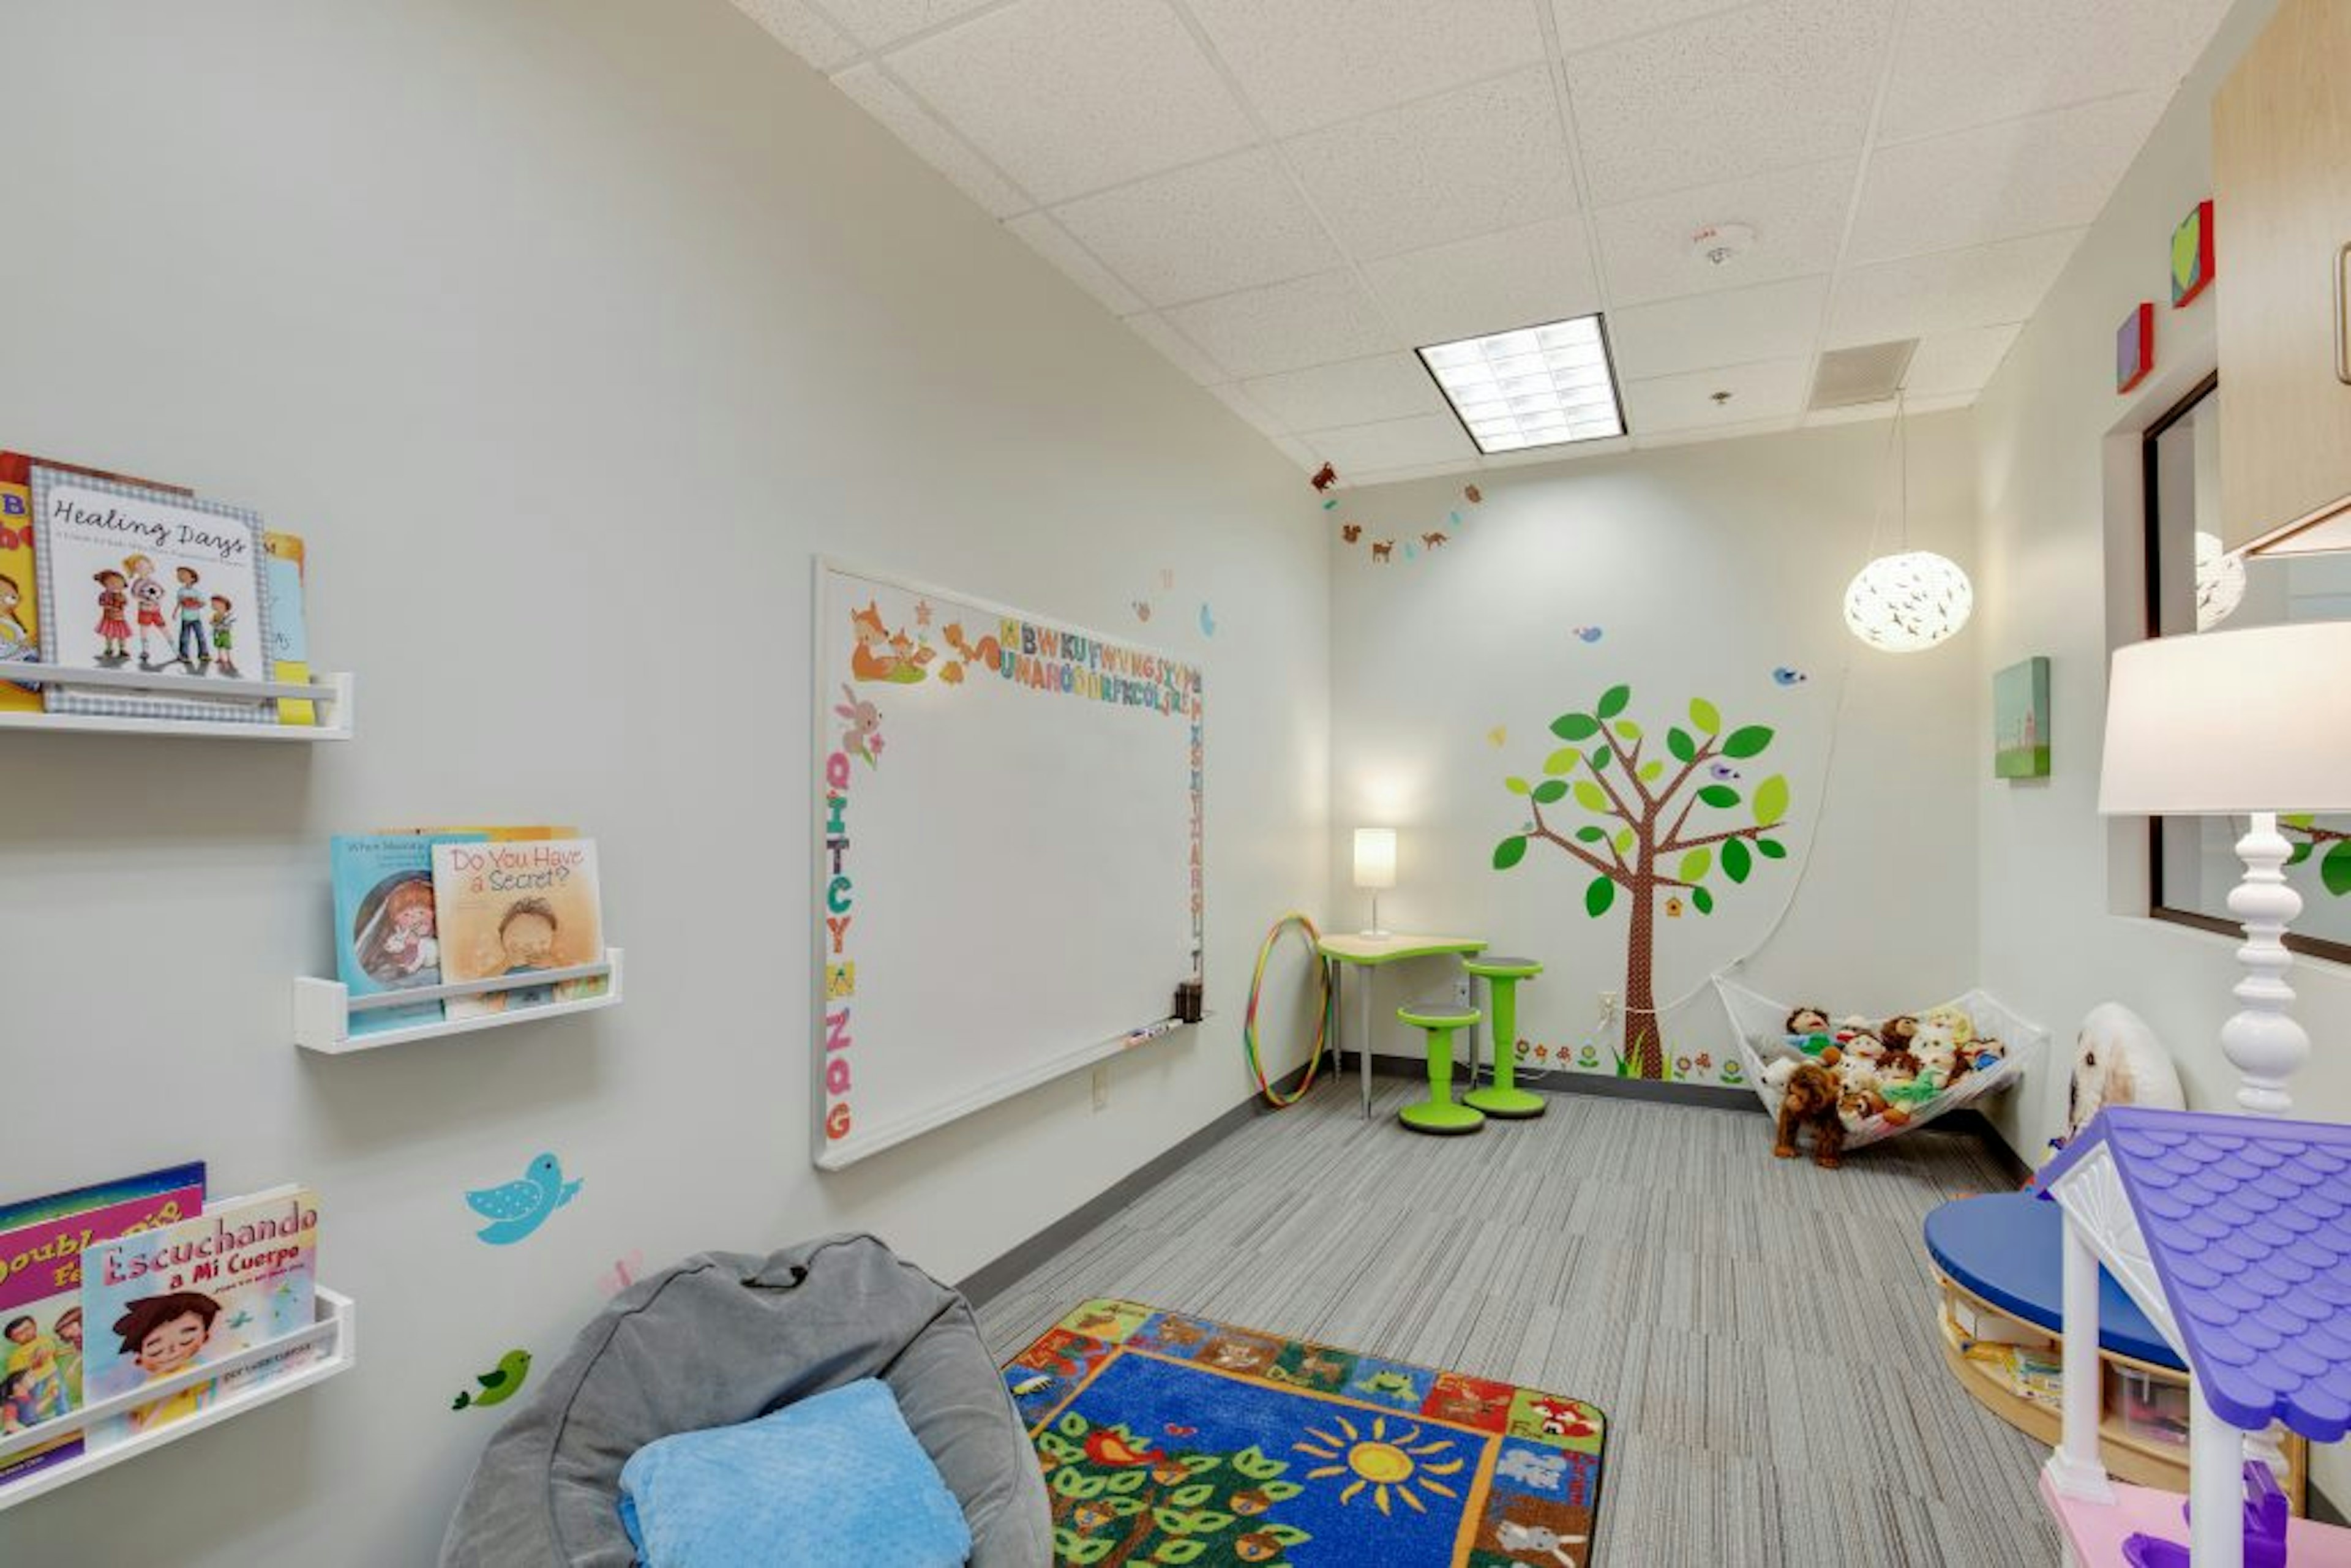 Child's playroom featuring books, colorful rug, hammock full of toys, and mural tree on wall.